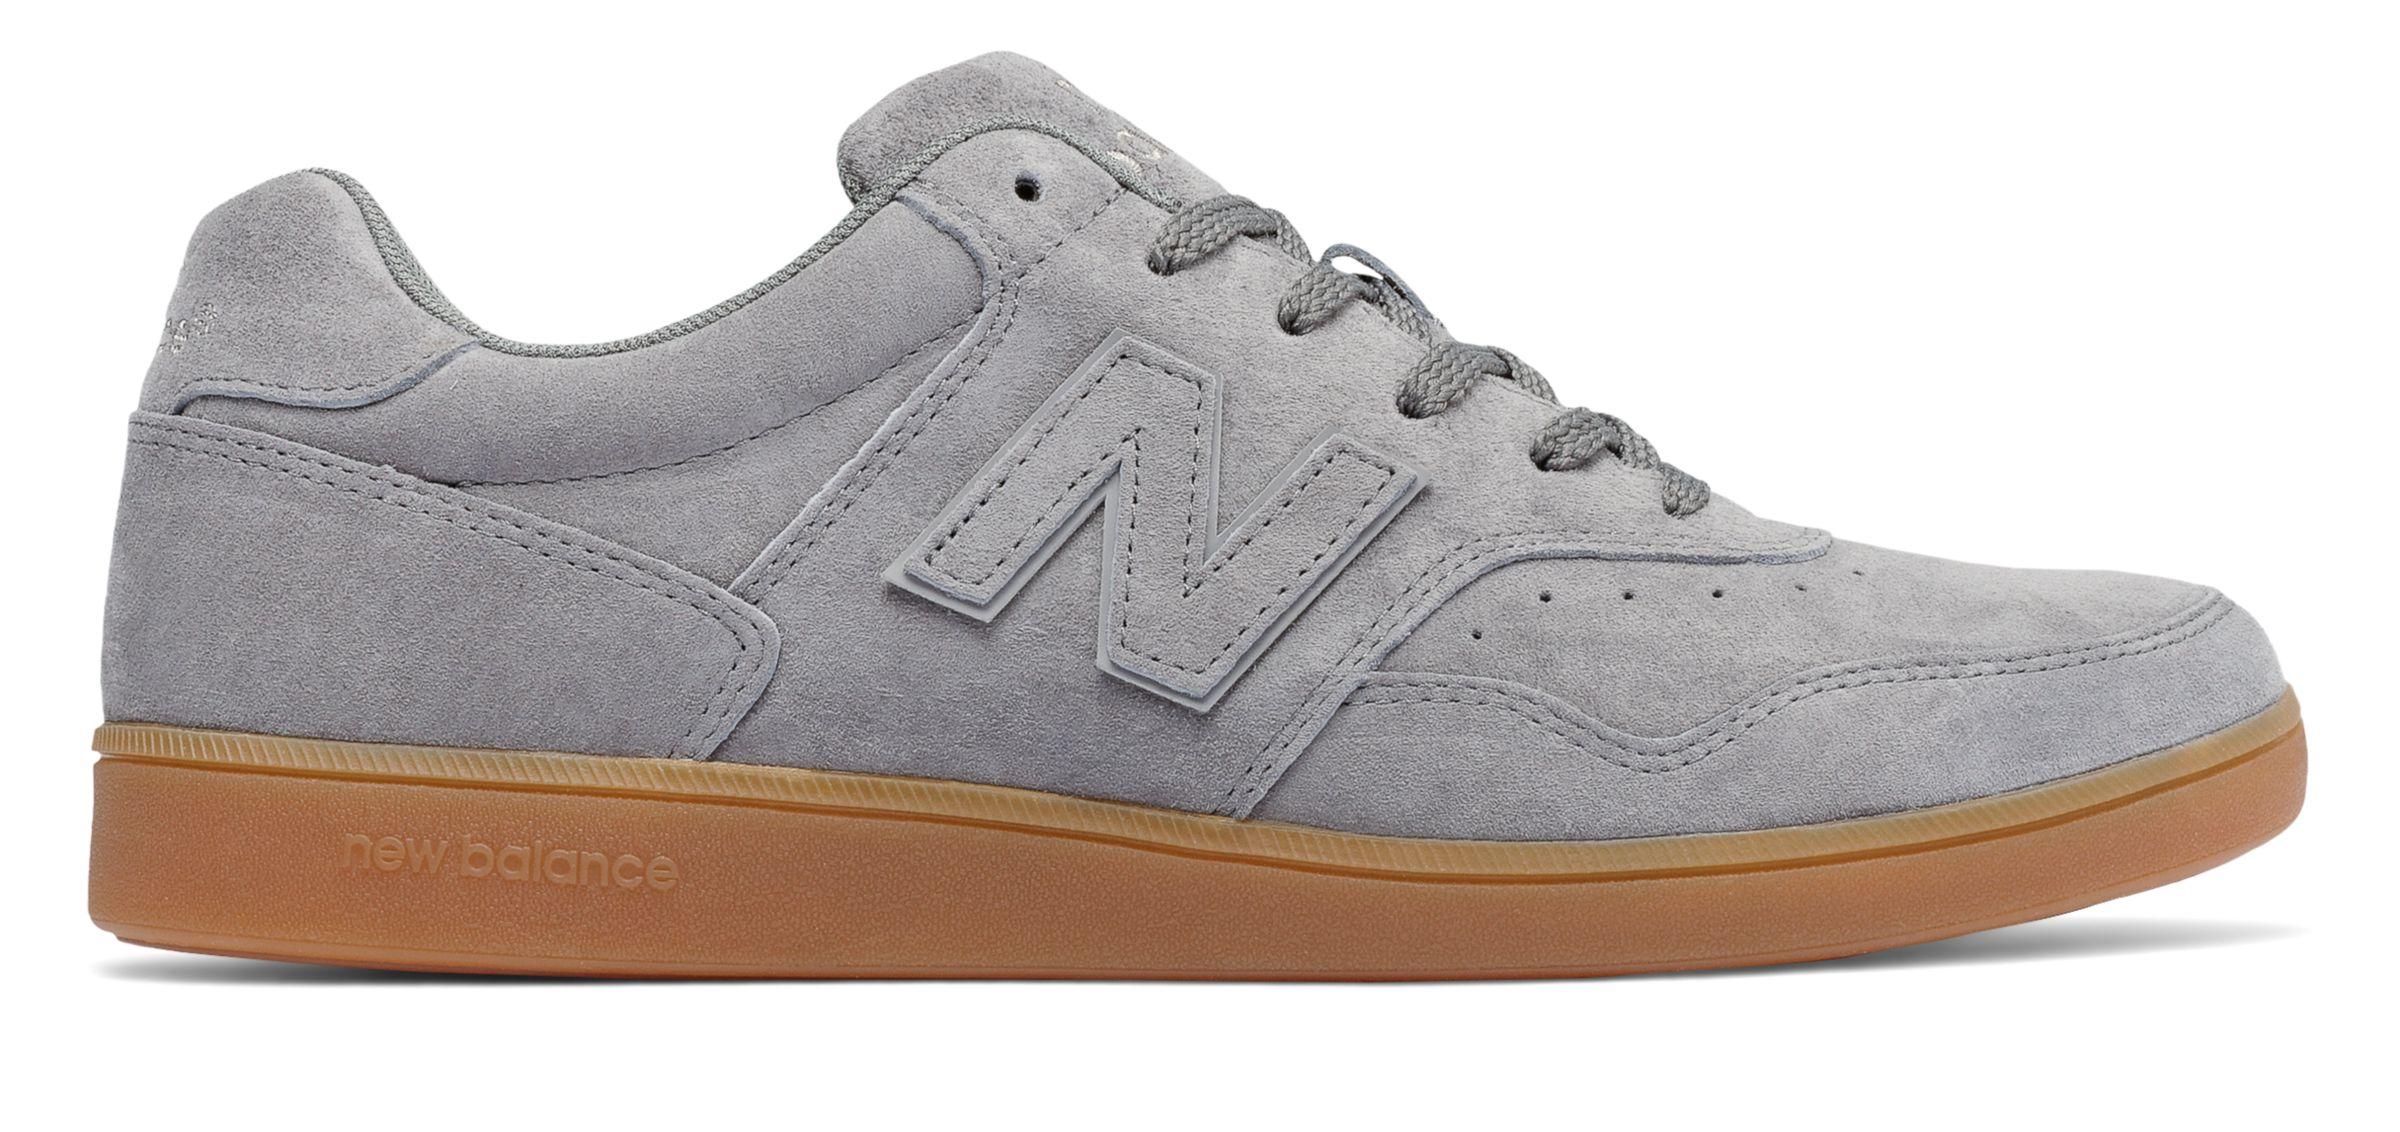 New Balance Suede 288 288 in Charcoal (Gray) for Men - Lyst